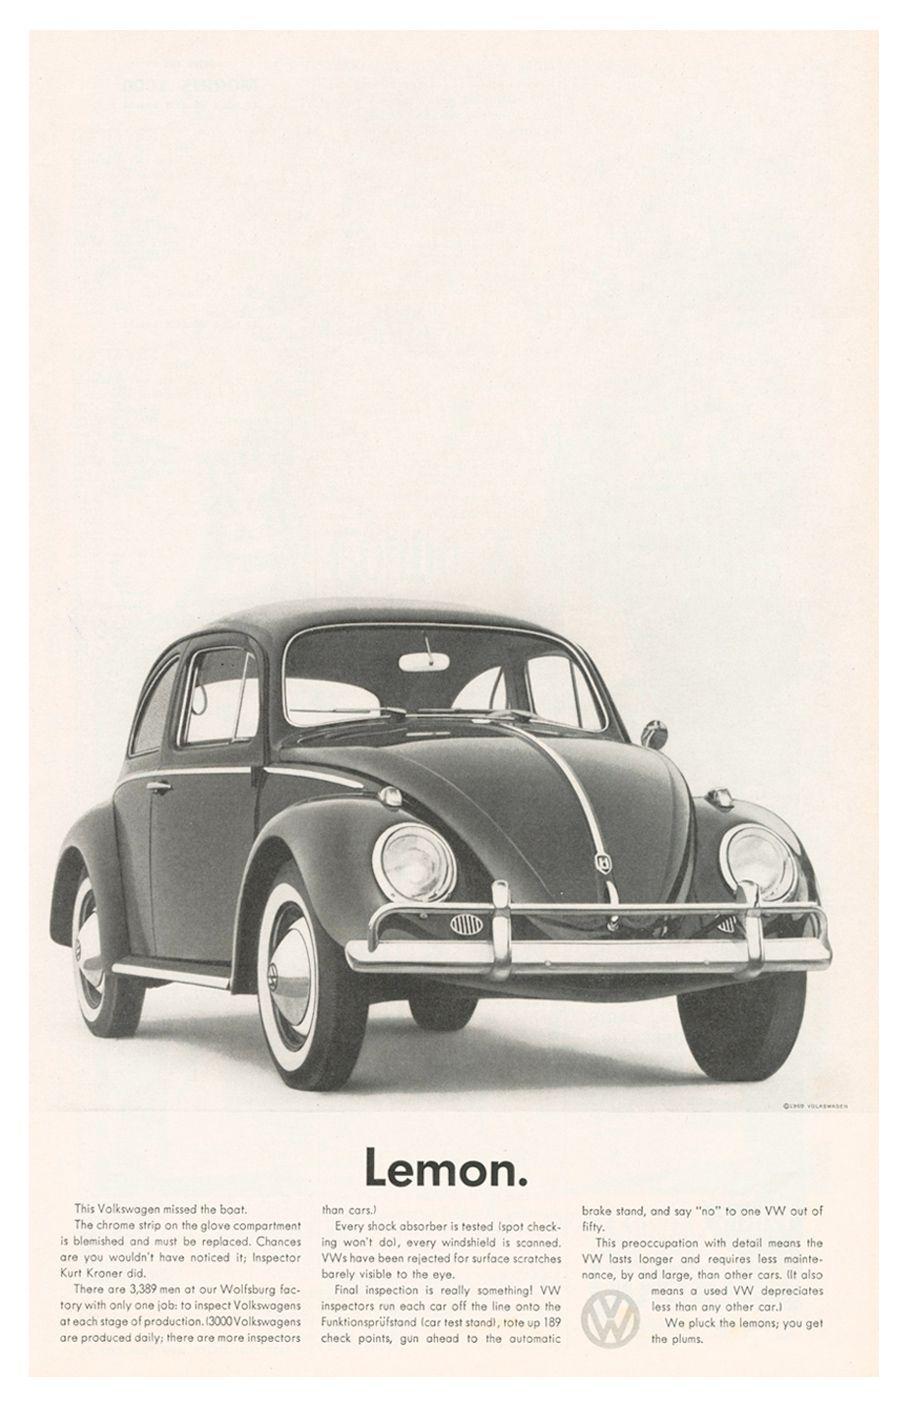 The Big Idea Designers The Beetle was originally designed as a people s car for Nazi Germany, so the Beetle was not an obvious success on